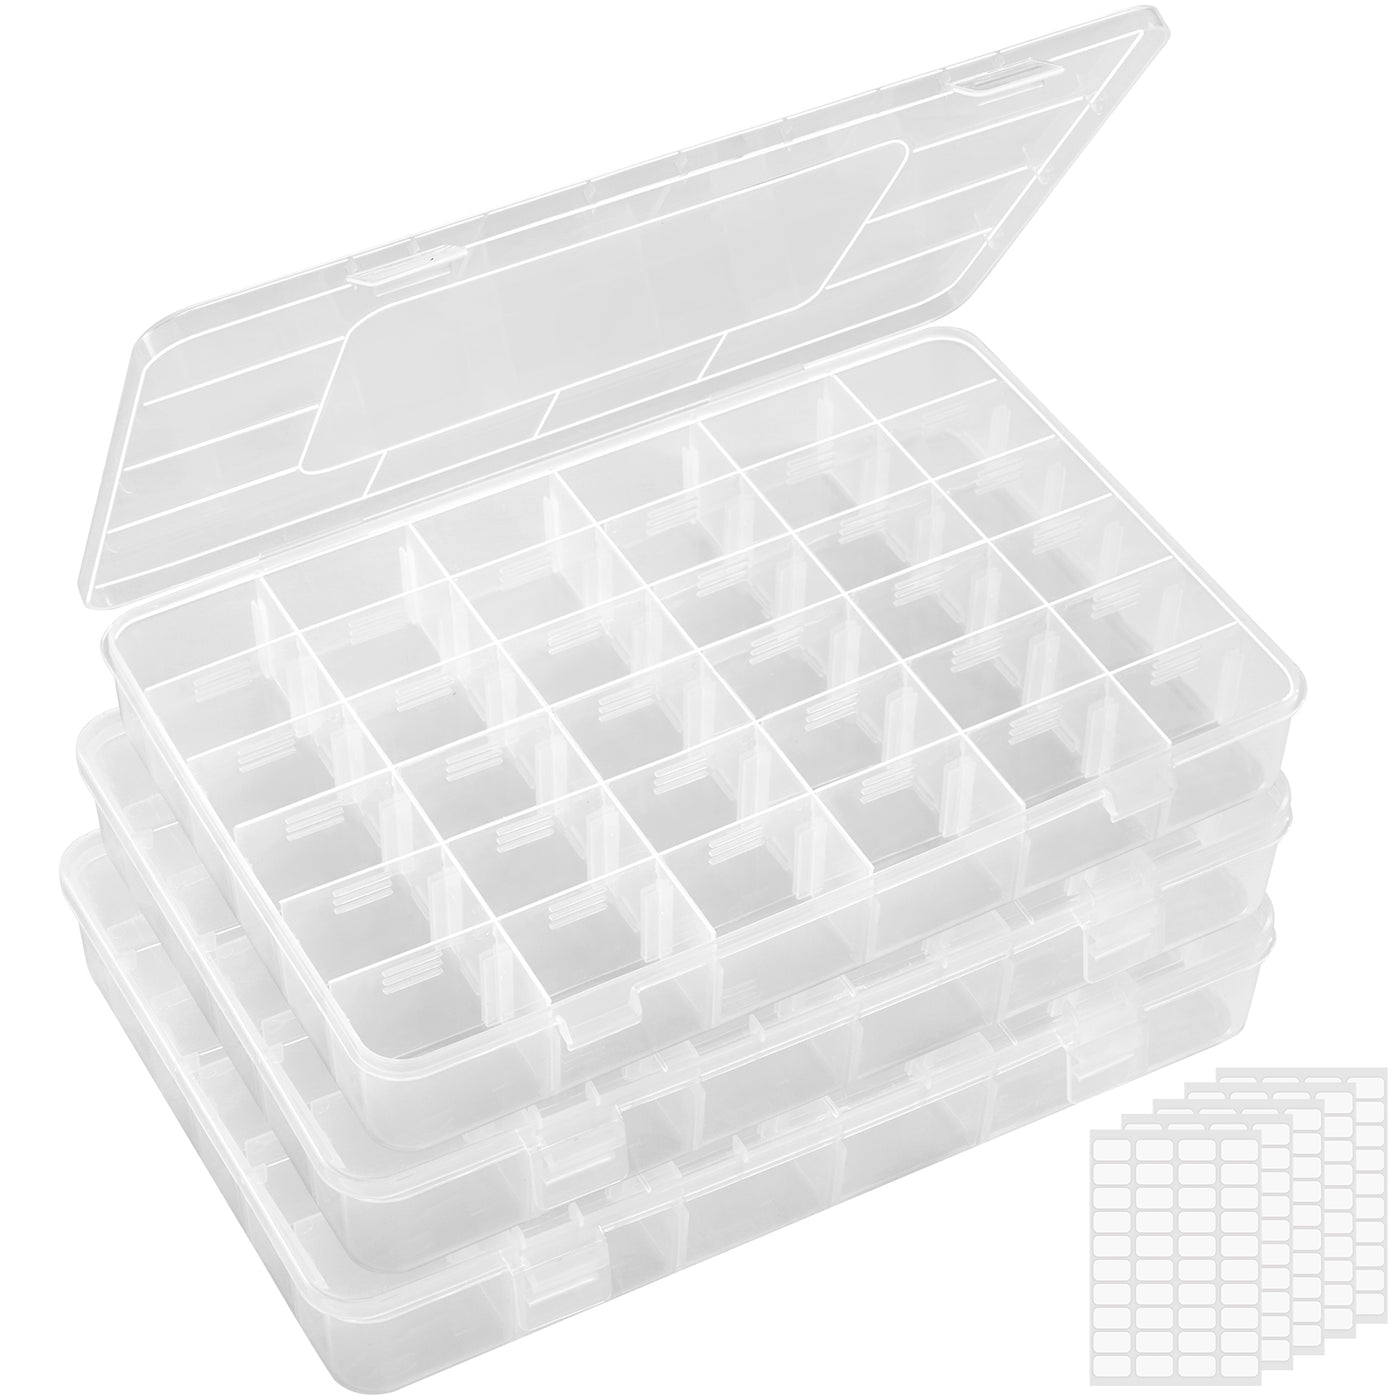 Transparent Plastic Storage Box with Lid for Organizing Jewelry